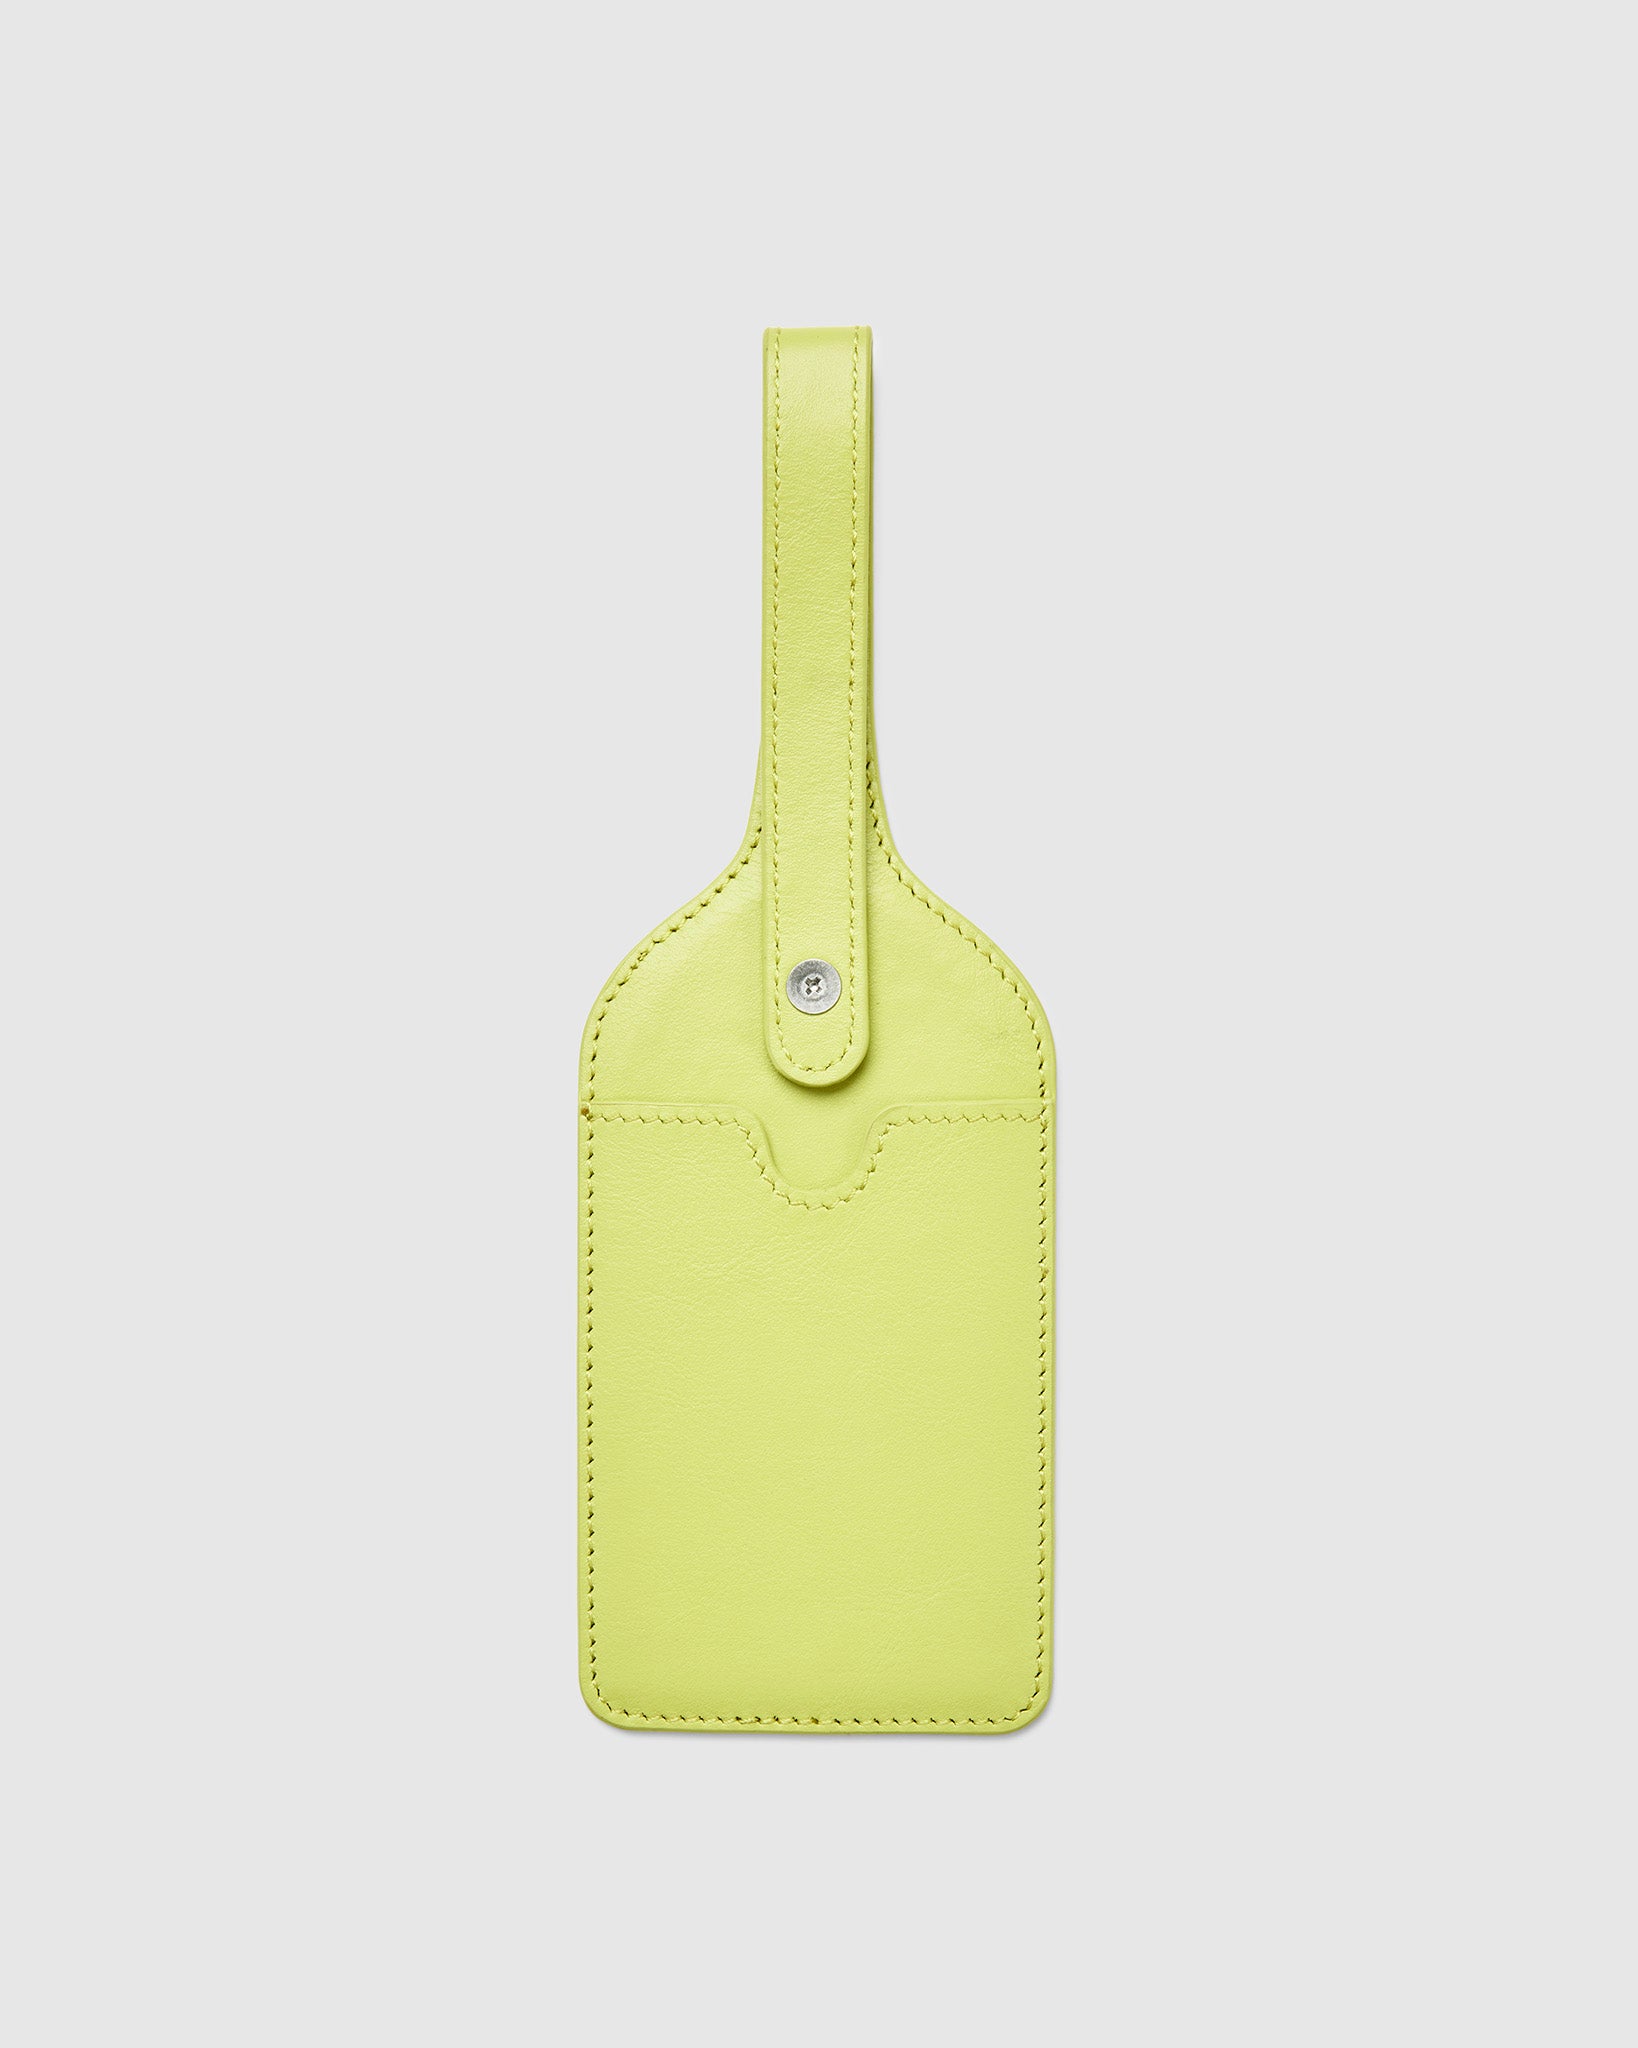 Leather Luggage Tag in Anise